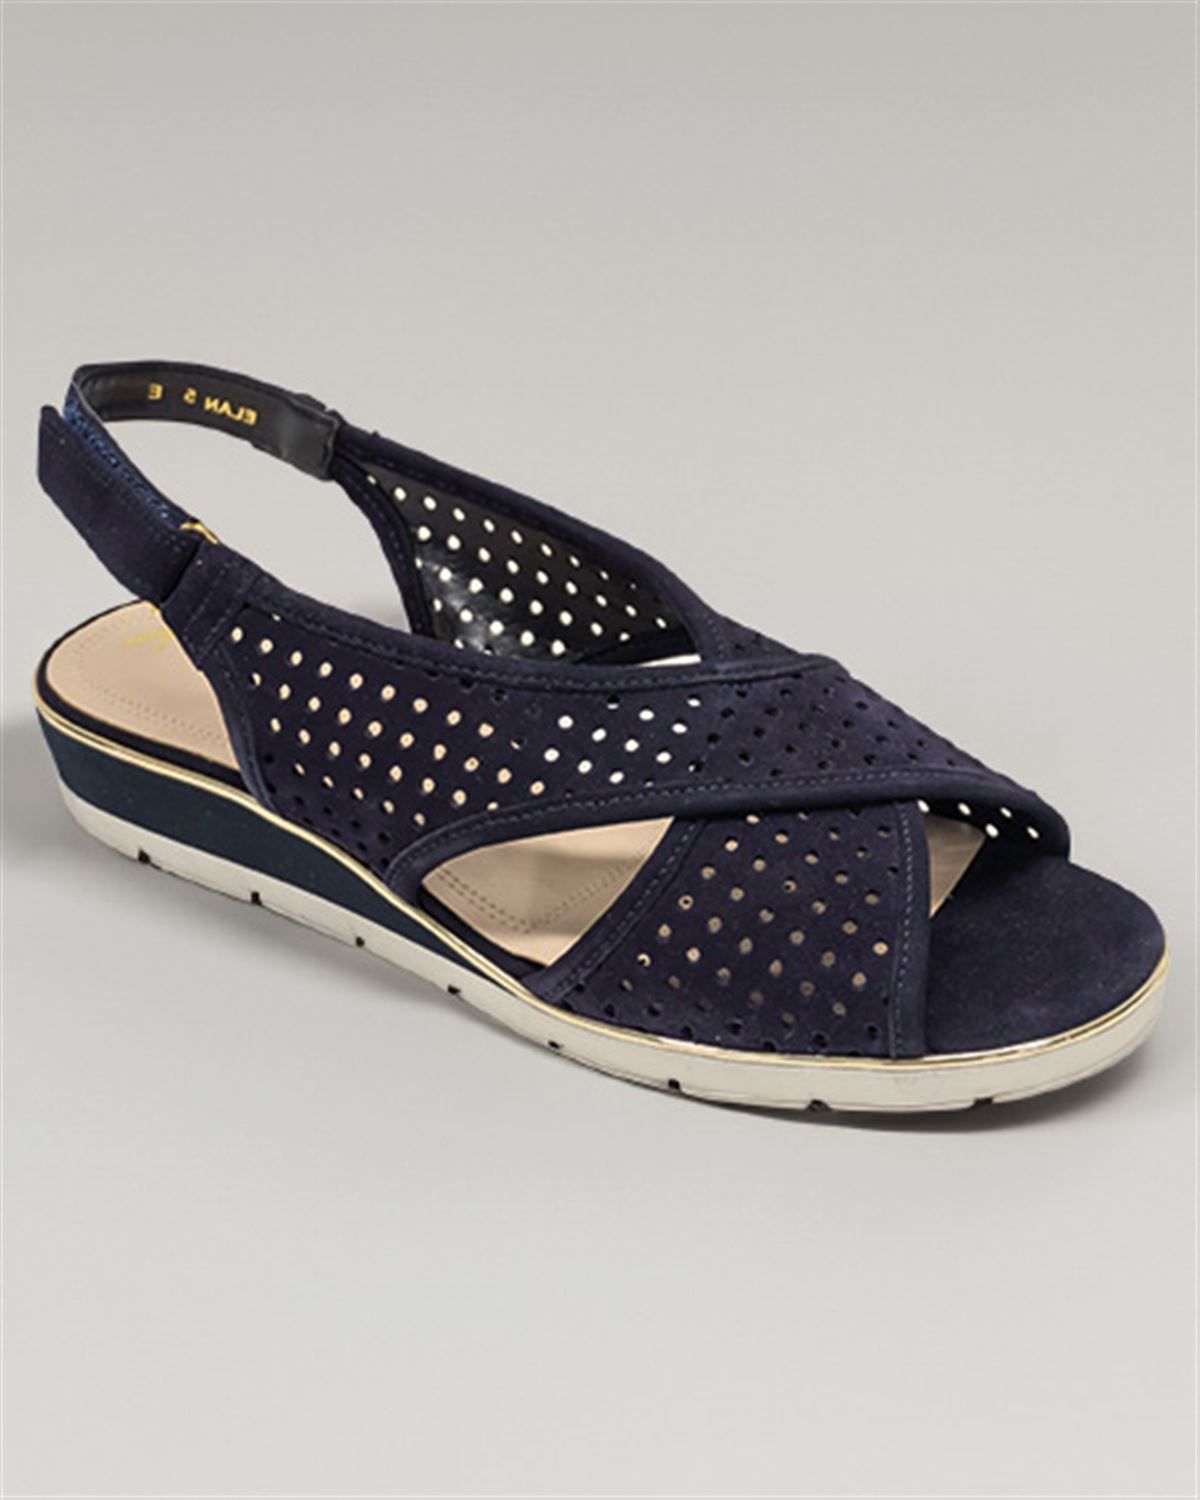 Van Dal Elan Sandal | Country Collection | Rubber Sole